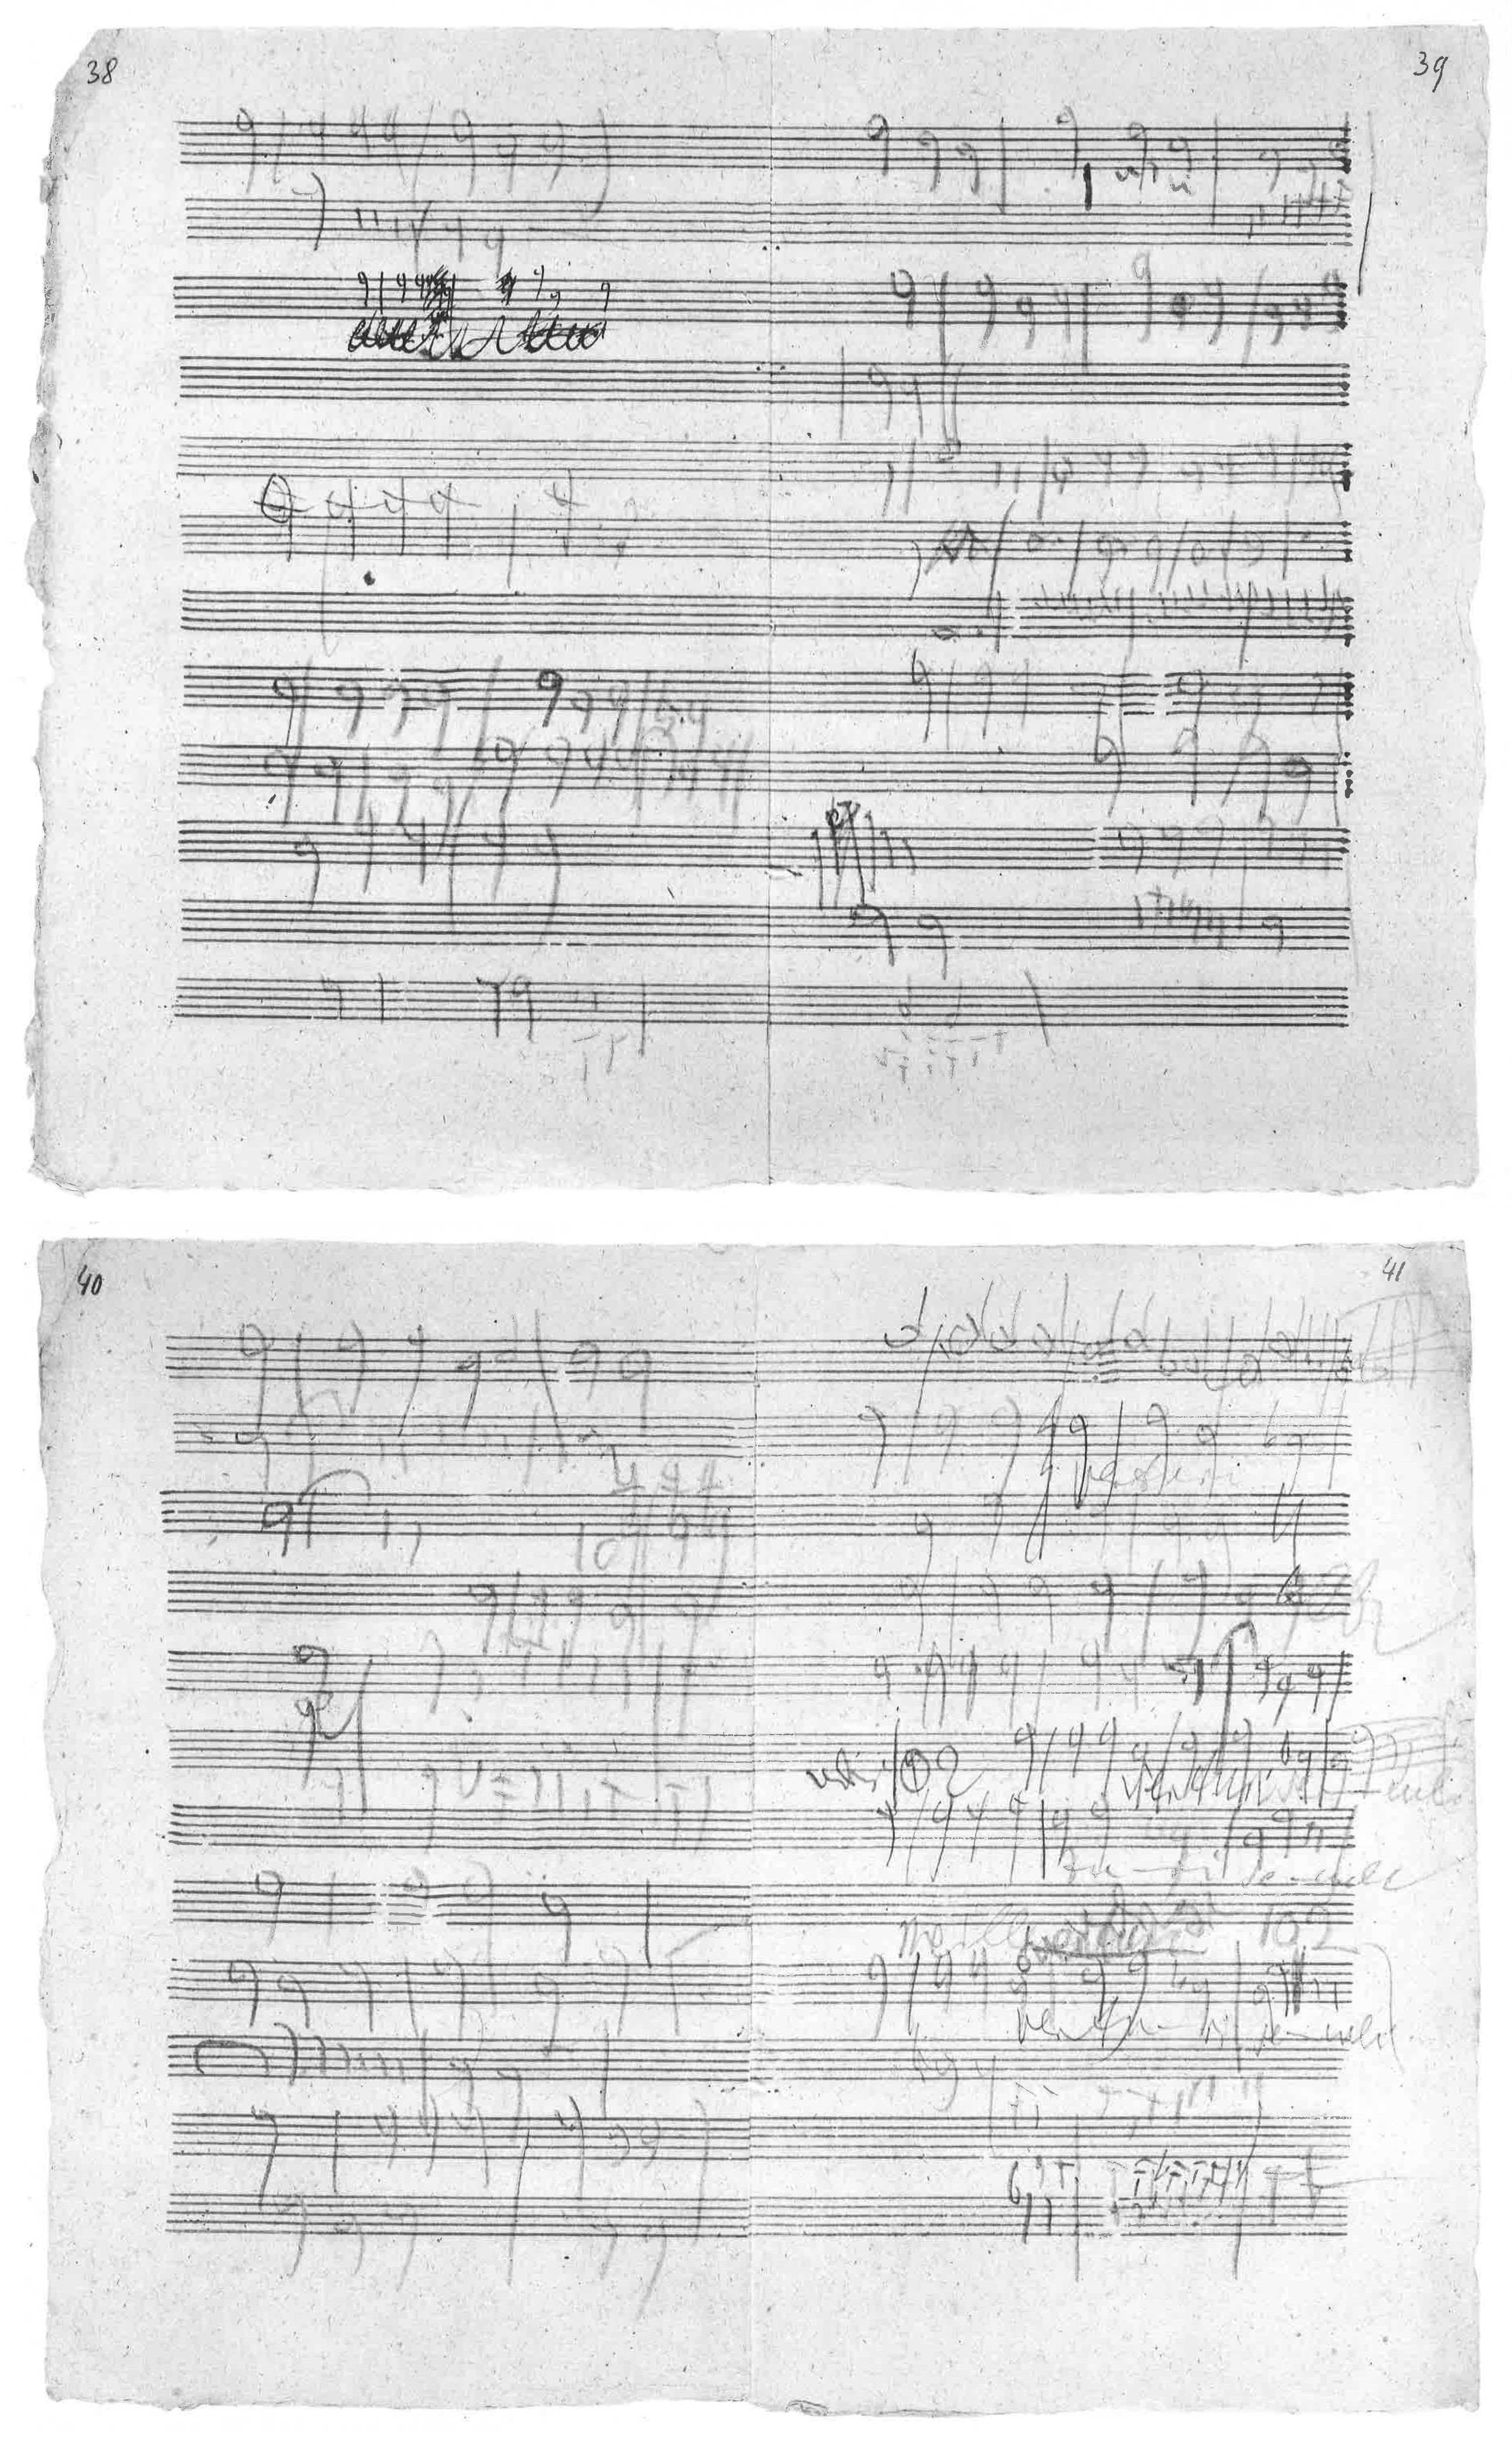 Two pages of music score scrawled in pencil.